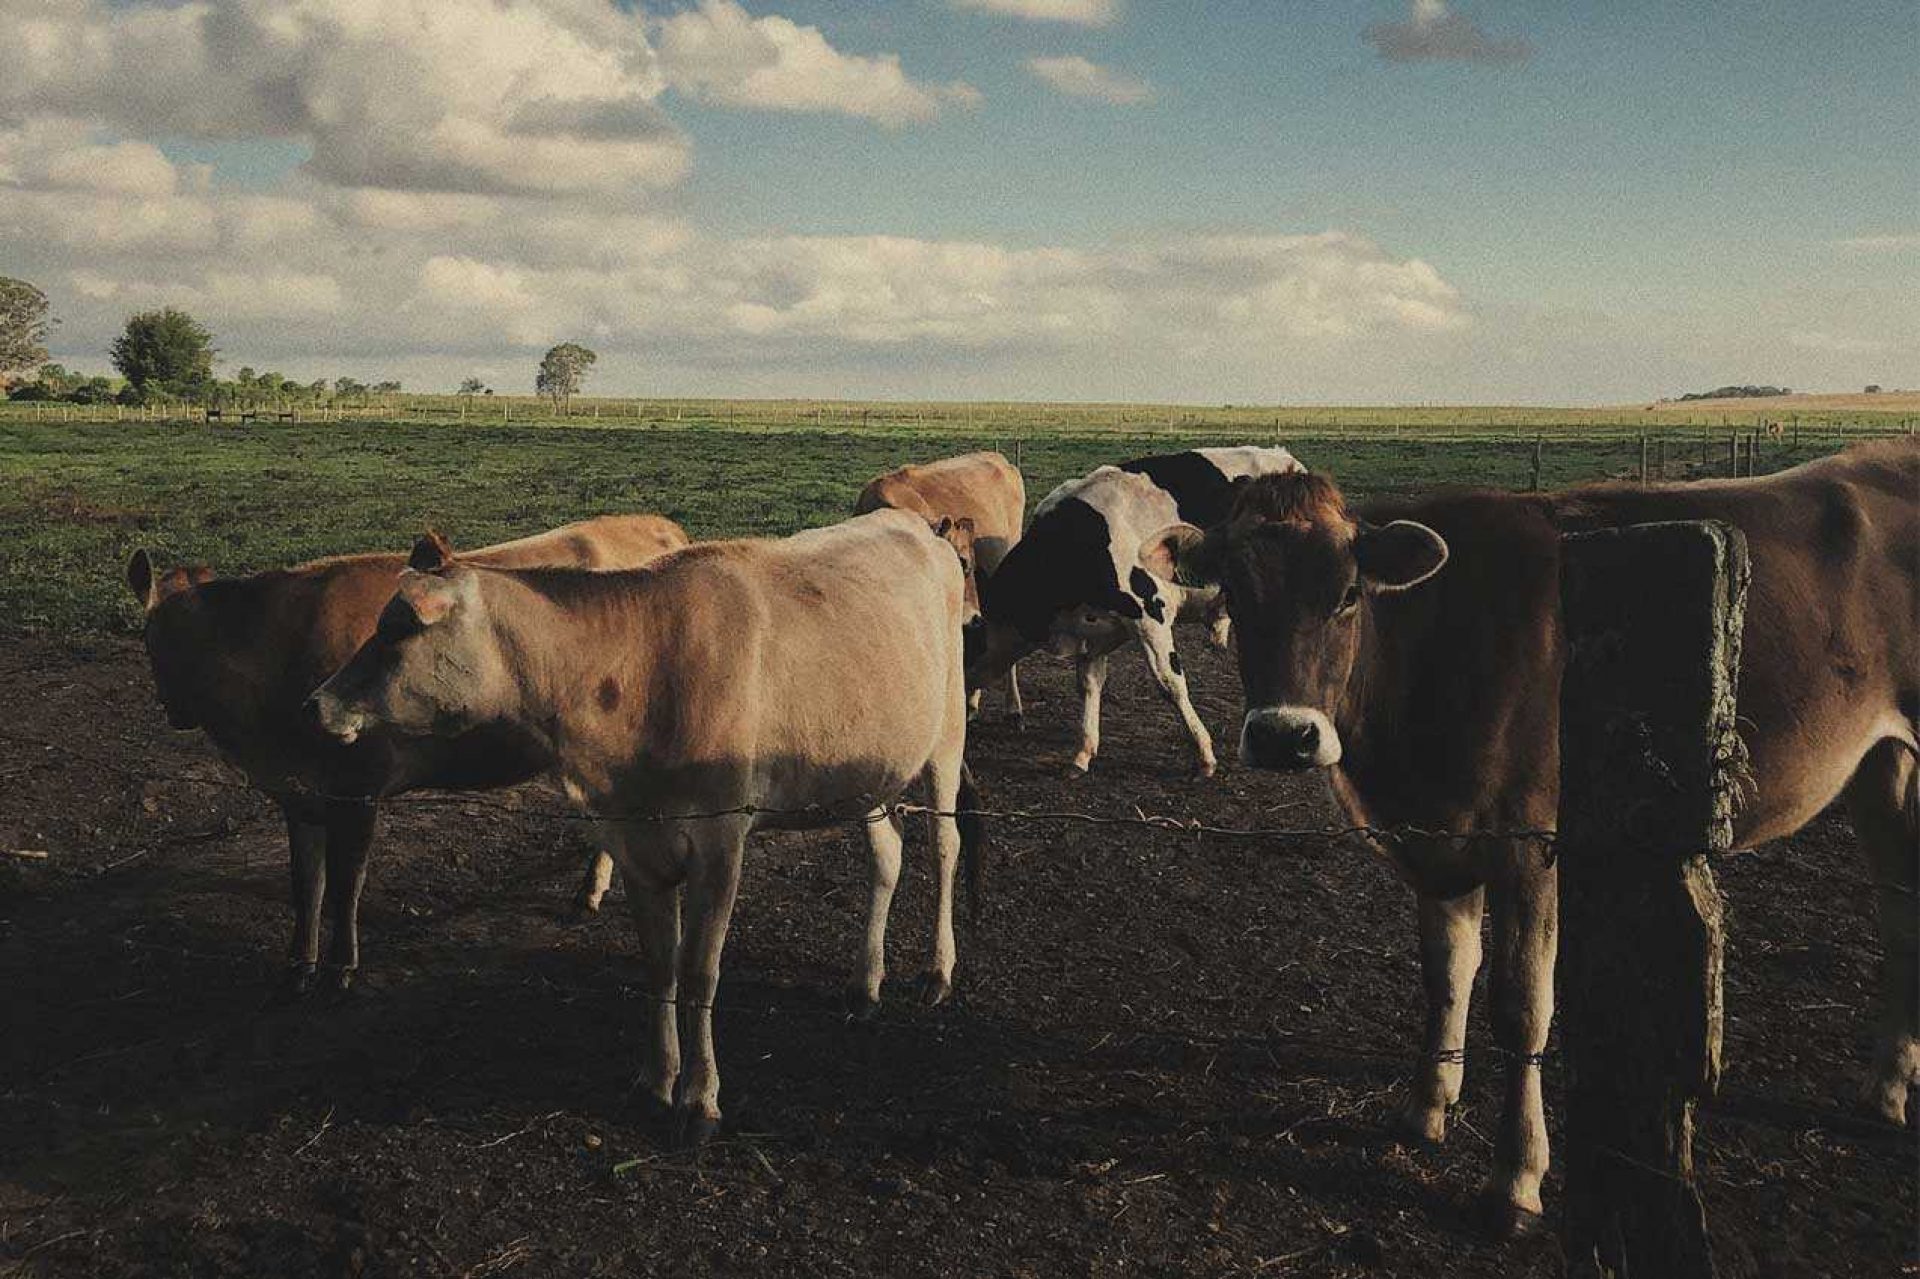 Group of cattle standing in dirt field